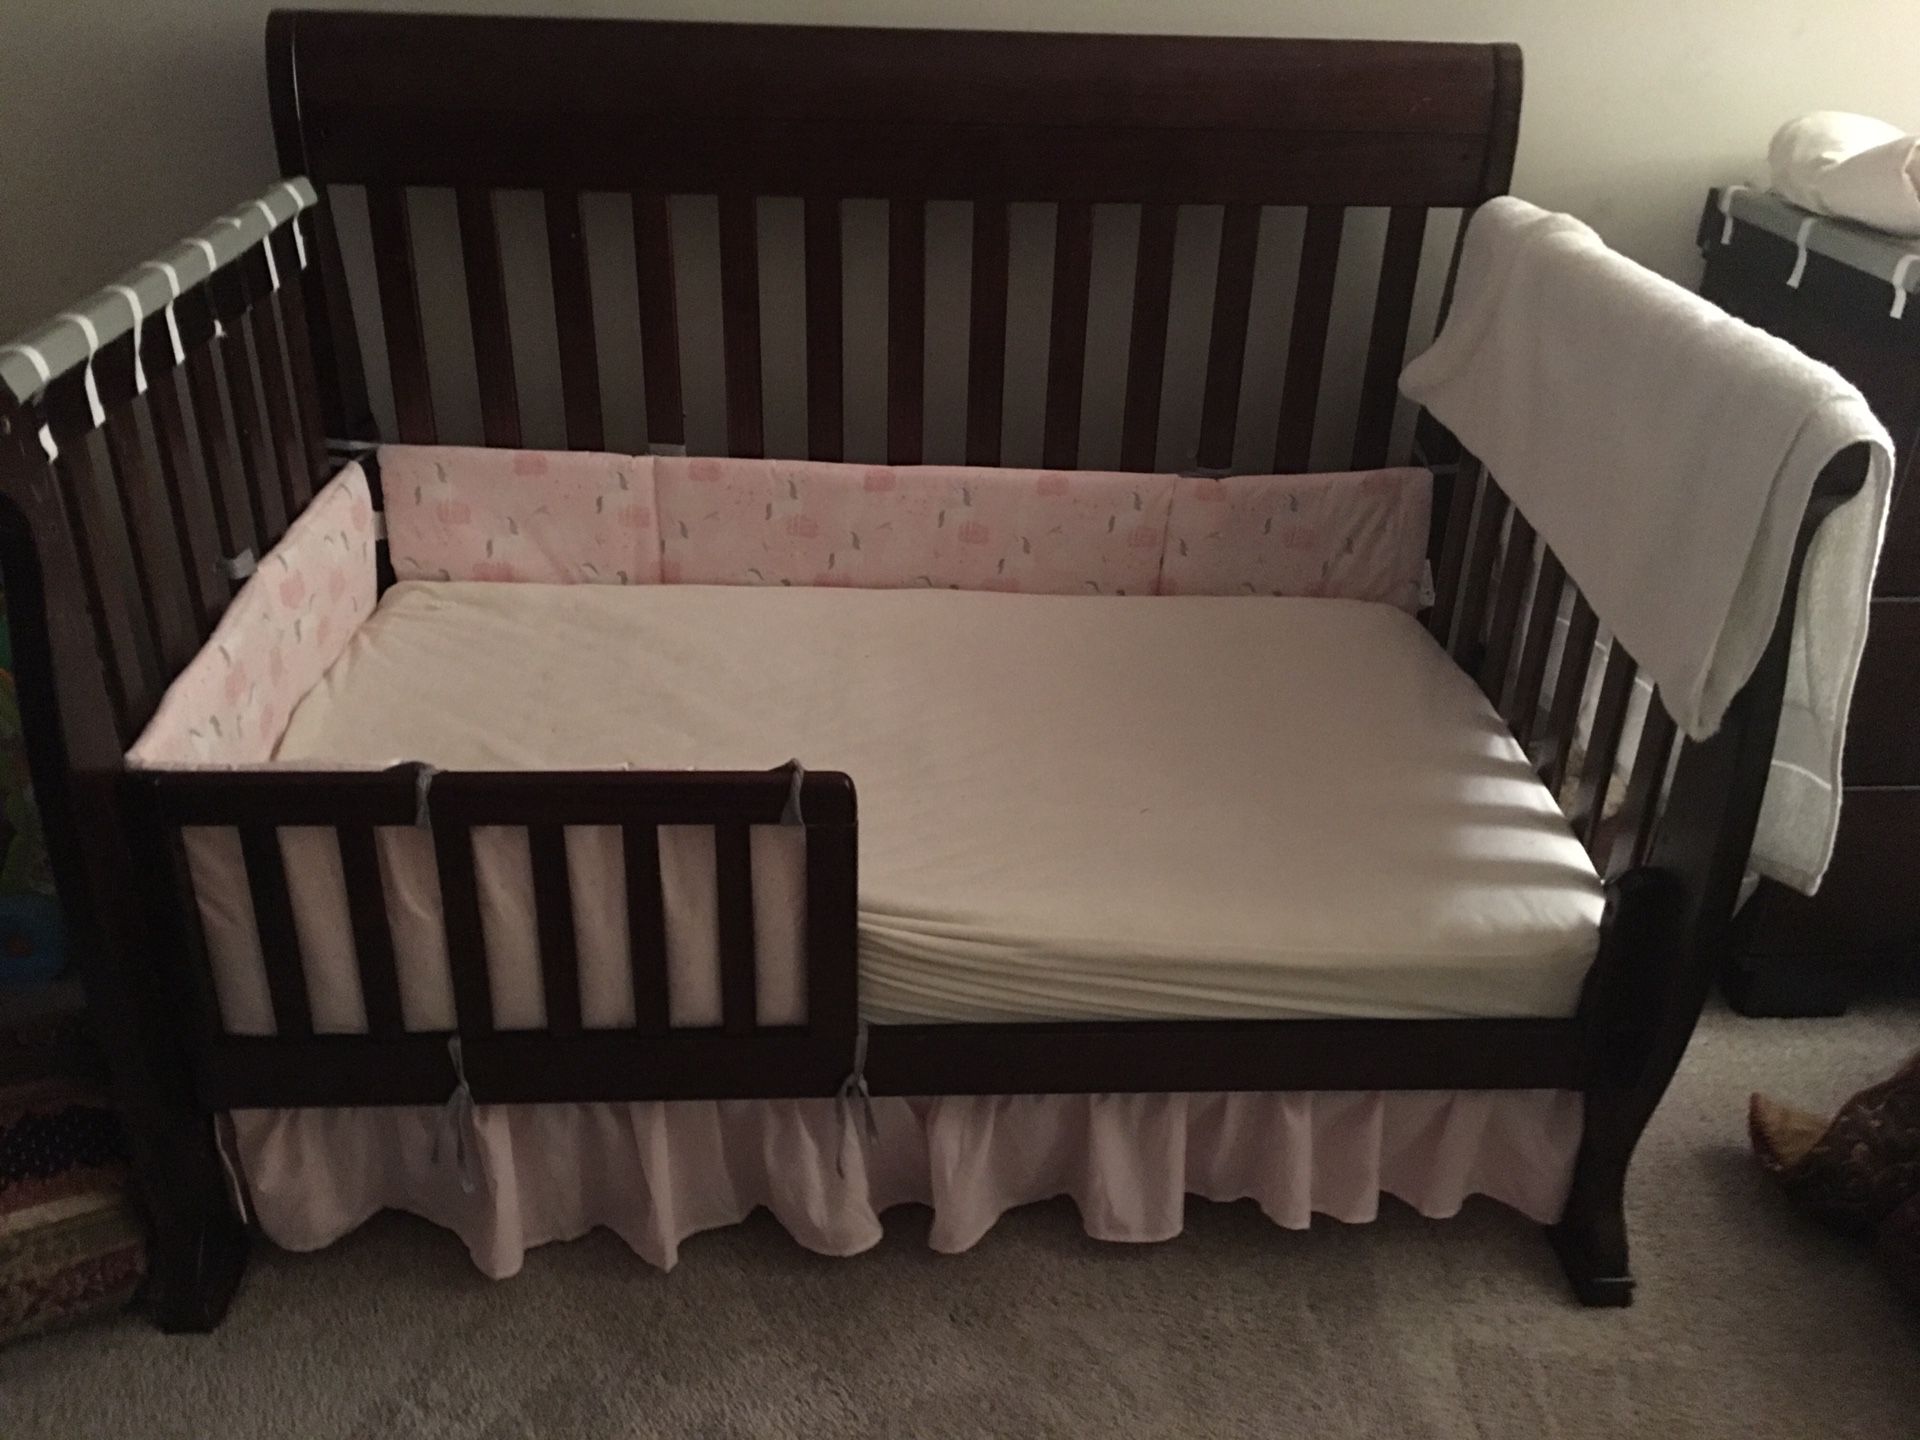 Baby Crib (converts to a bed)